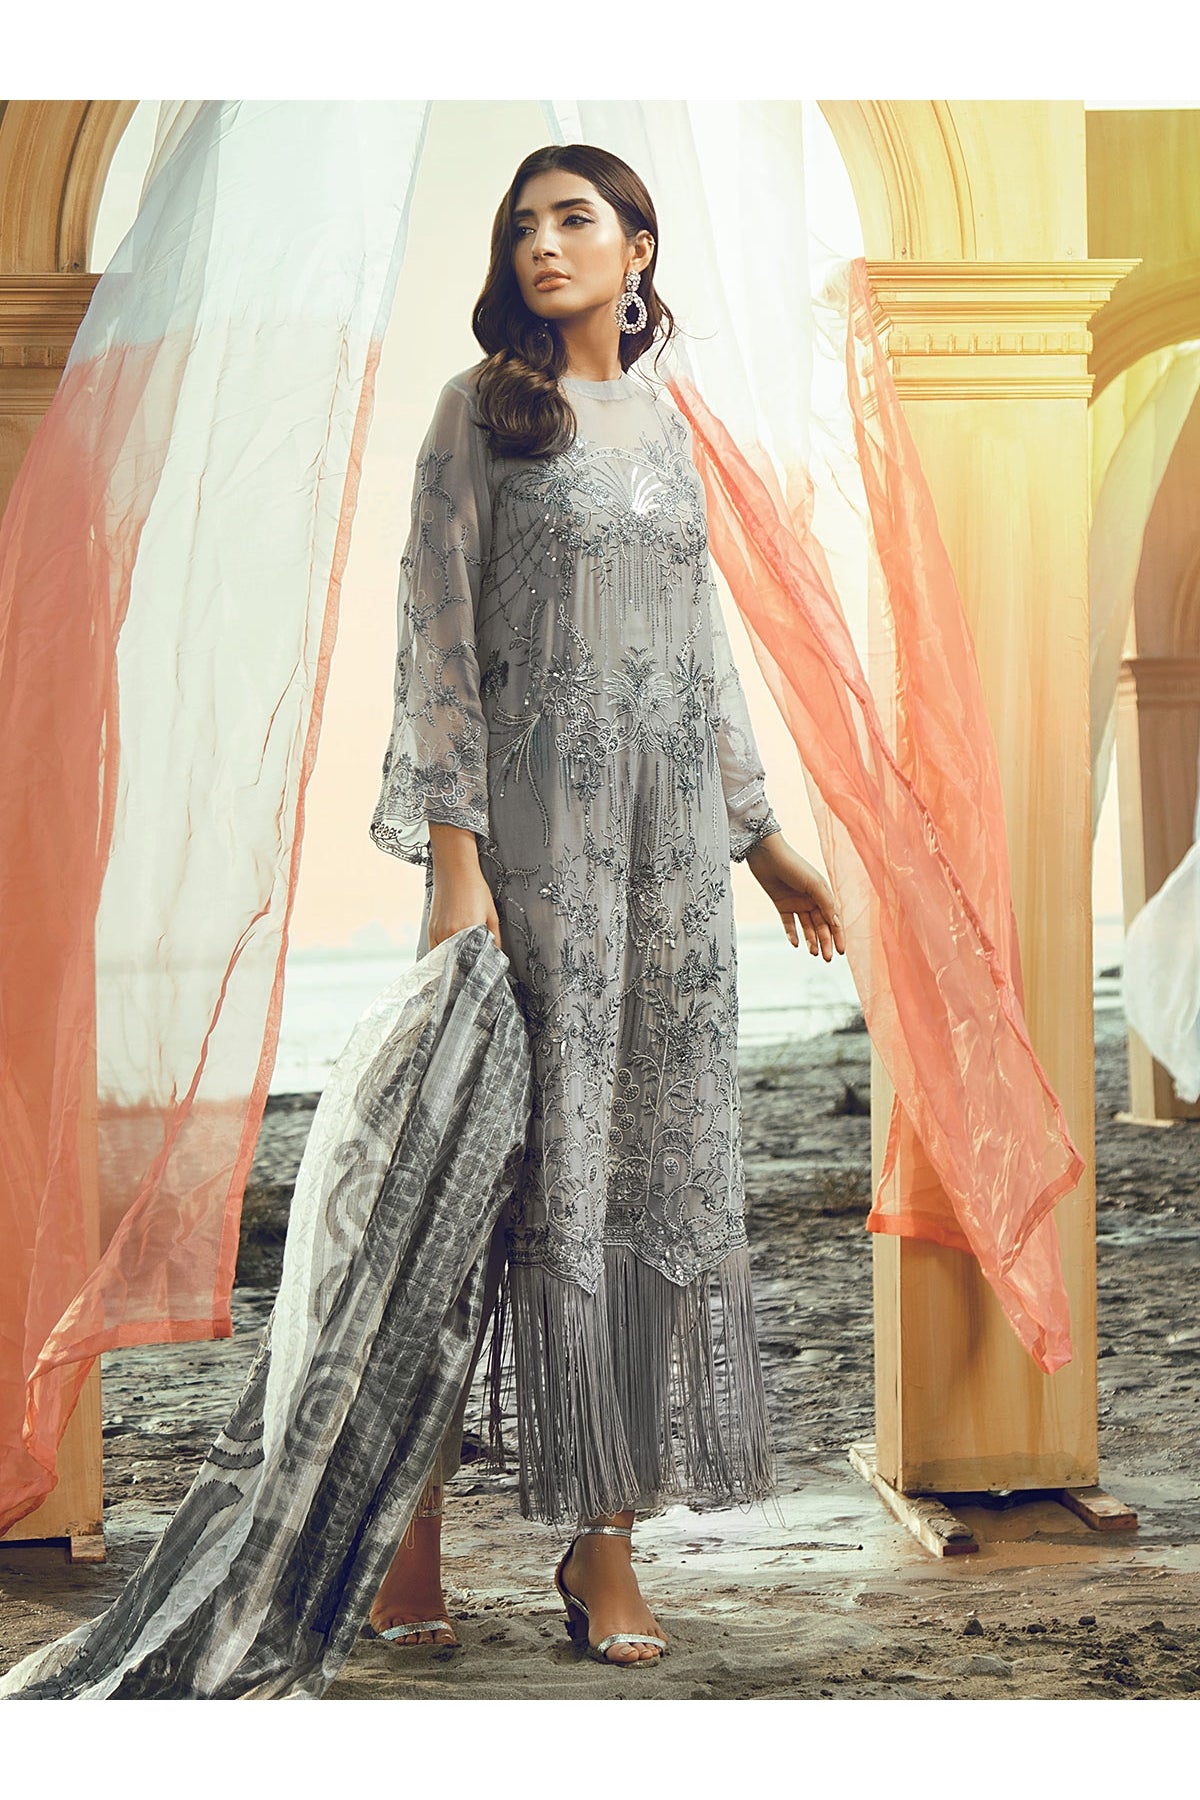 Symphony 01 (Rajbari - Luxia Formal Collection)